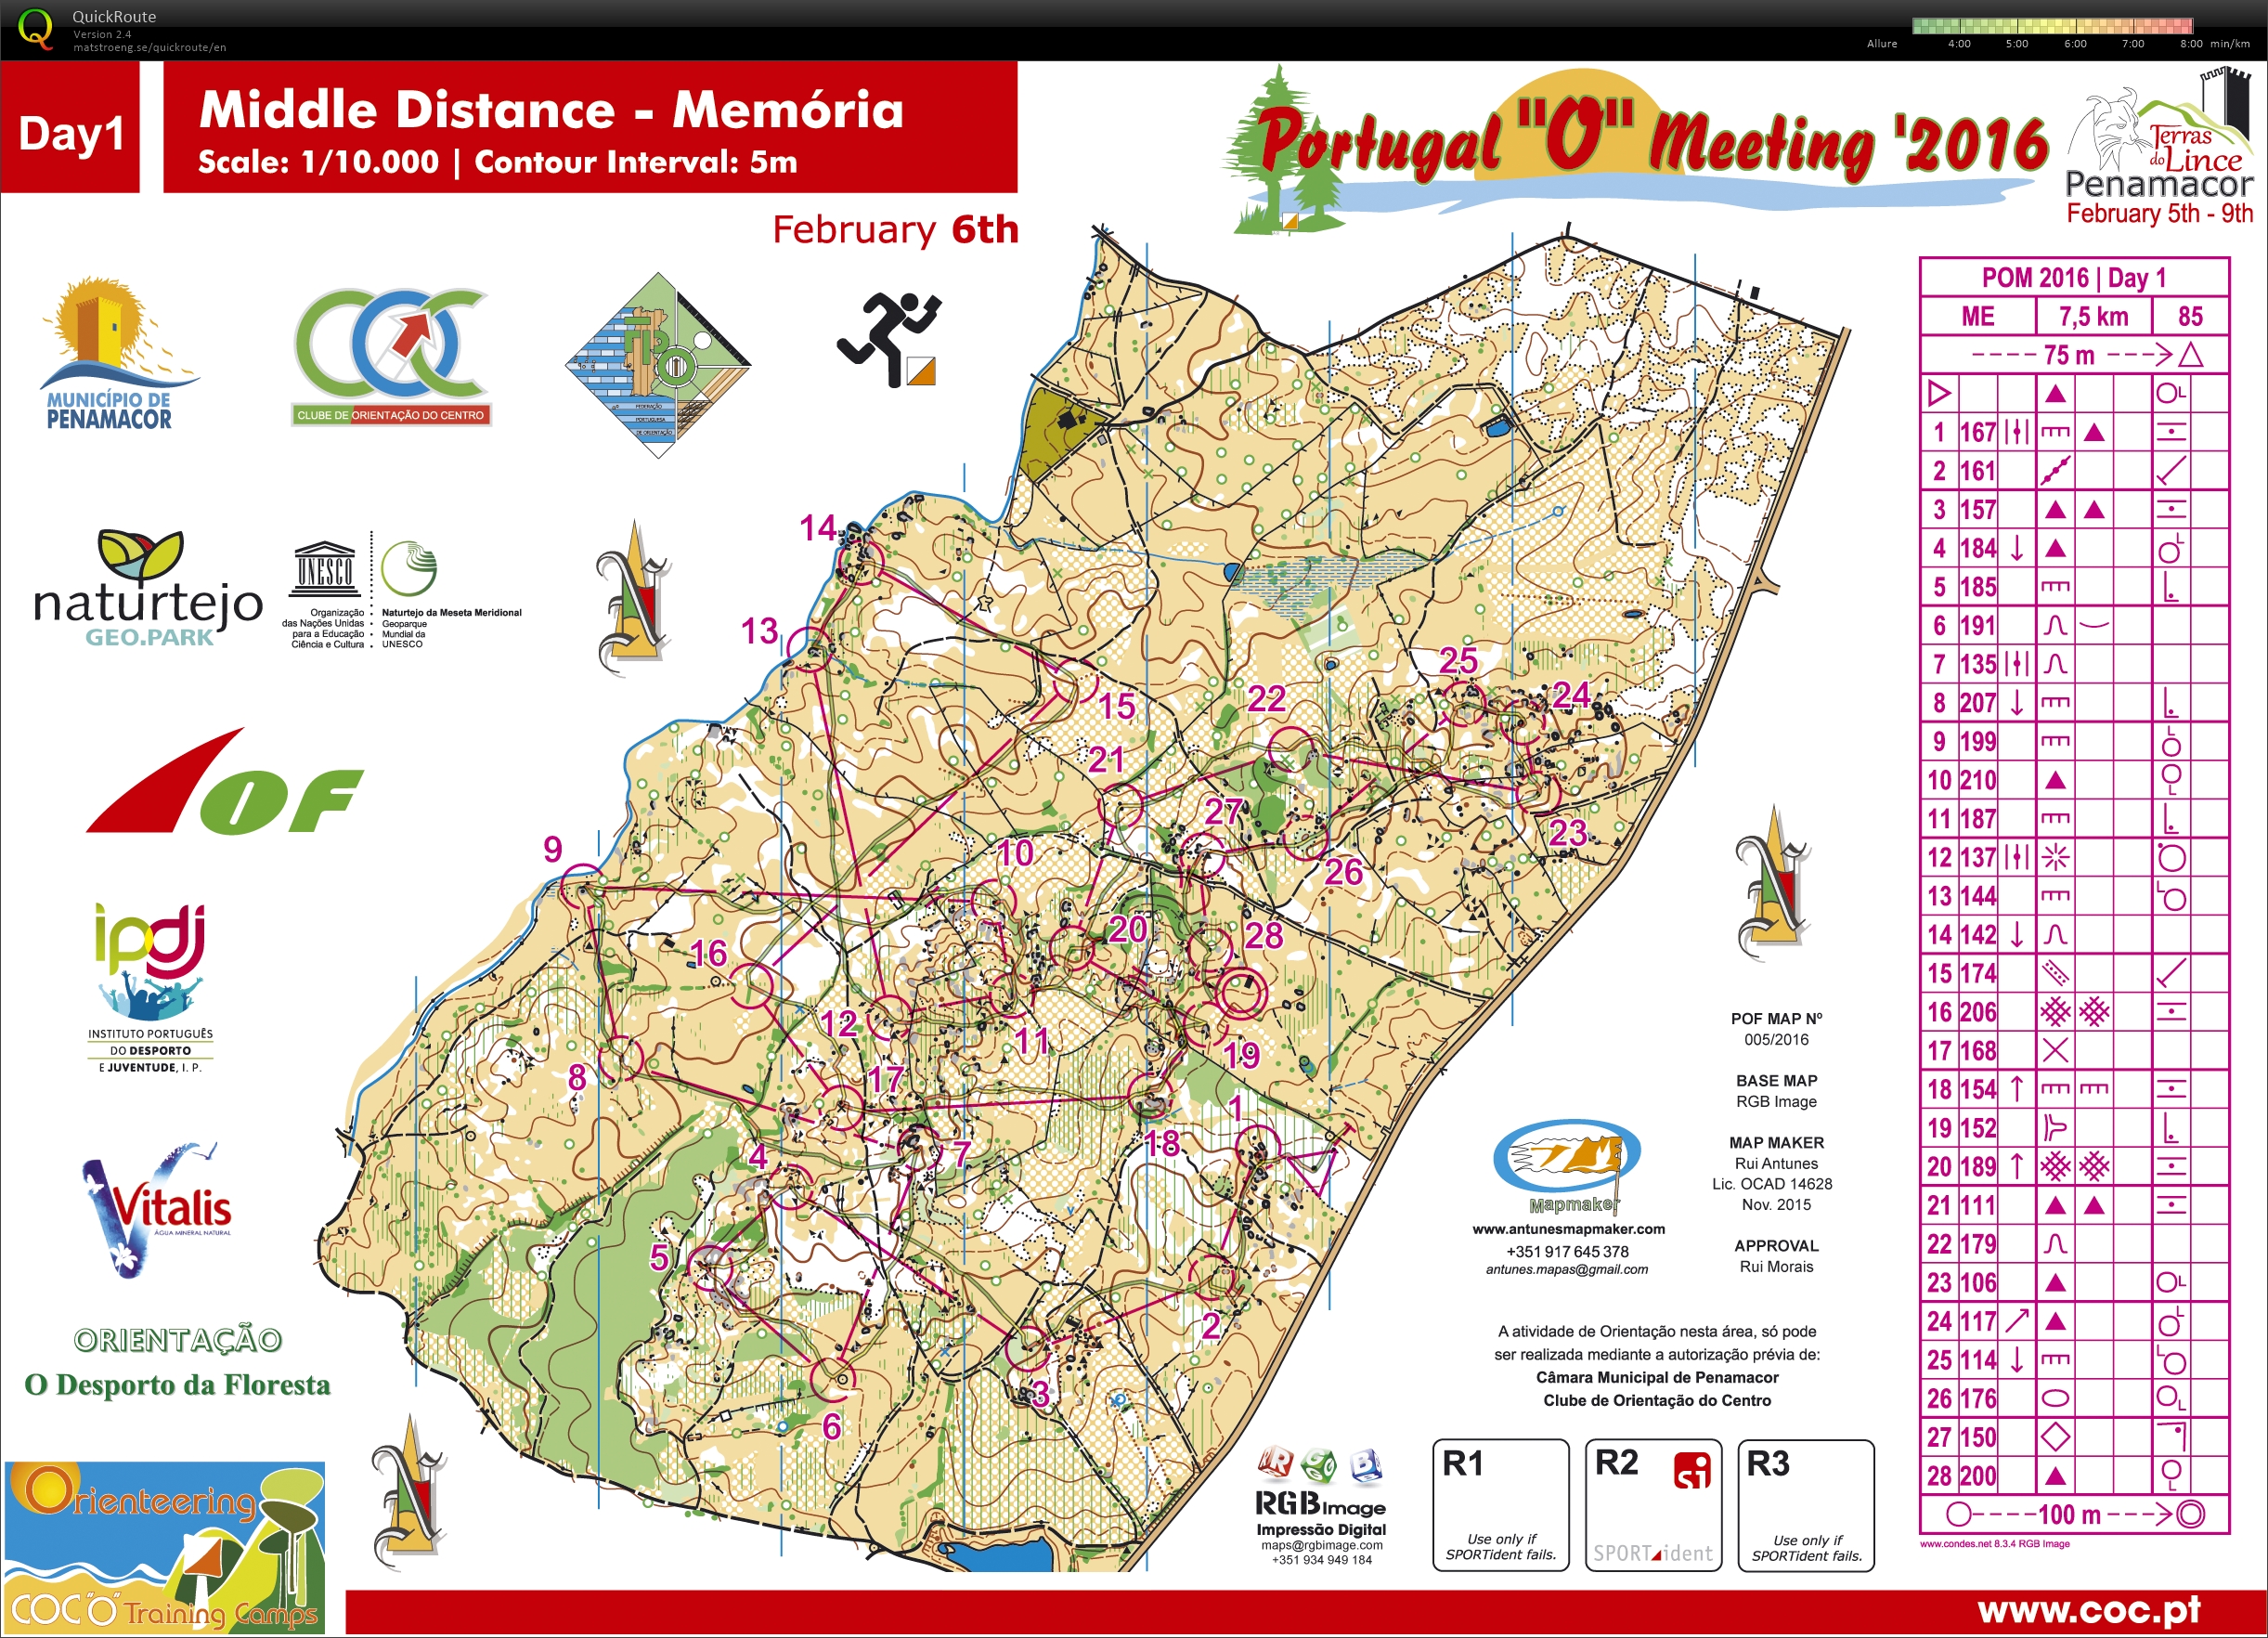 Portugal O Meeting Stage 1 (06.02.2016)